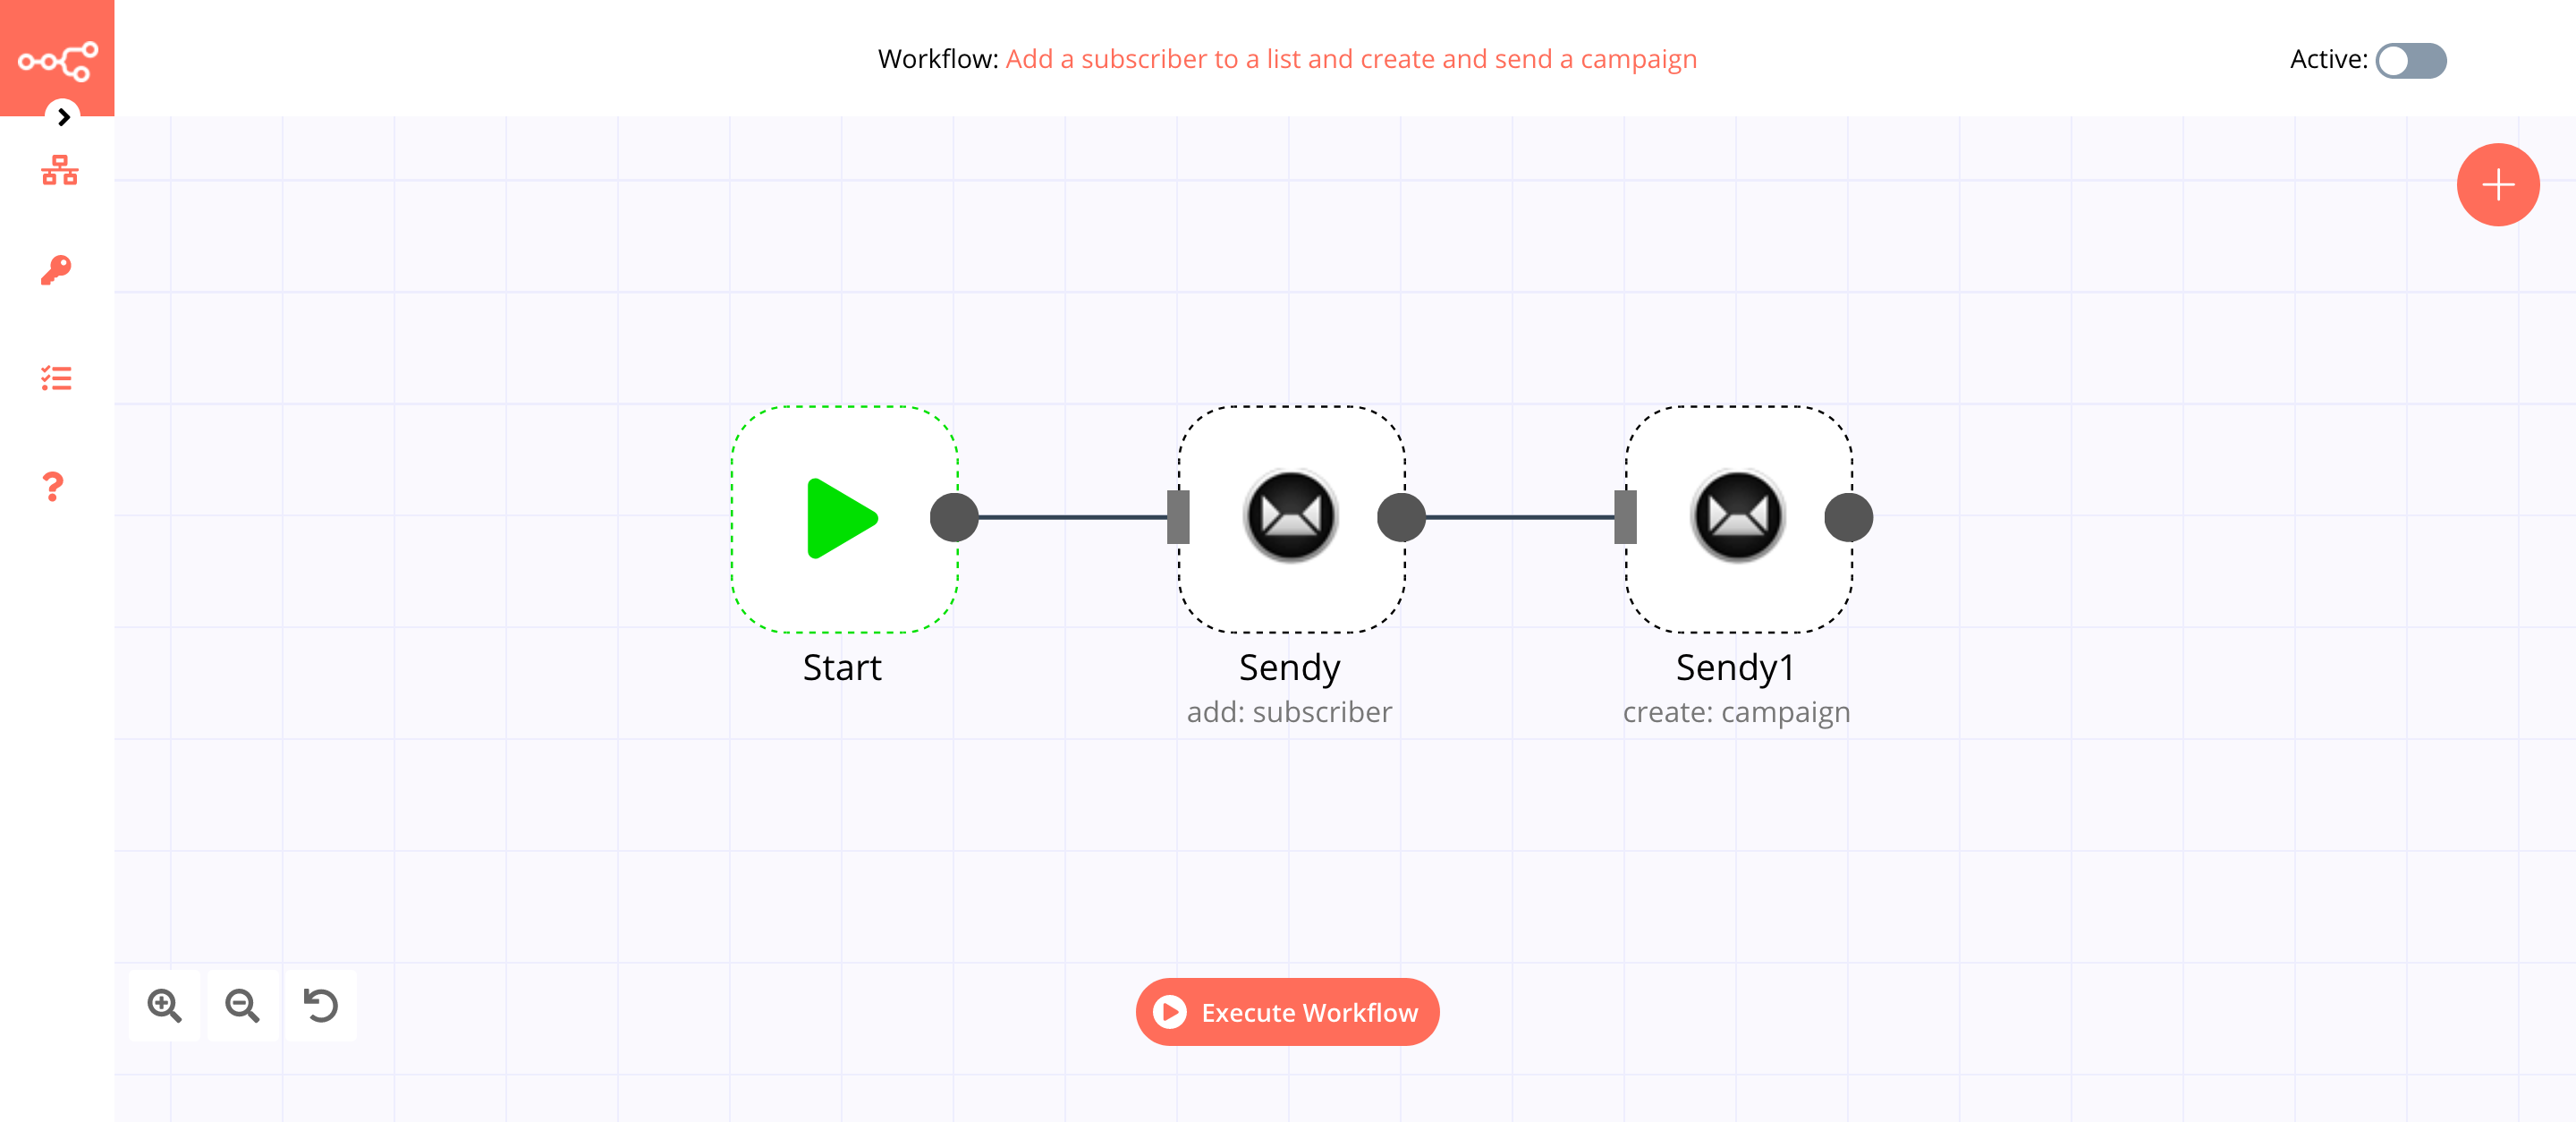 A workflow with the Sendy node